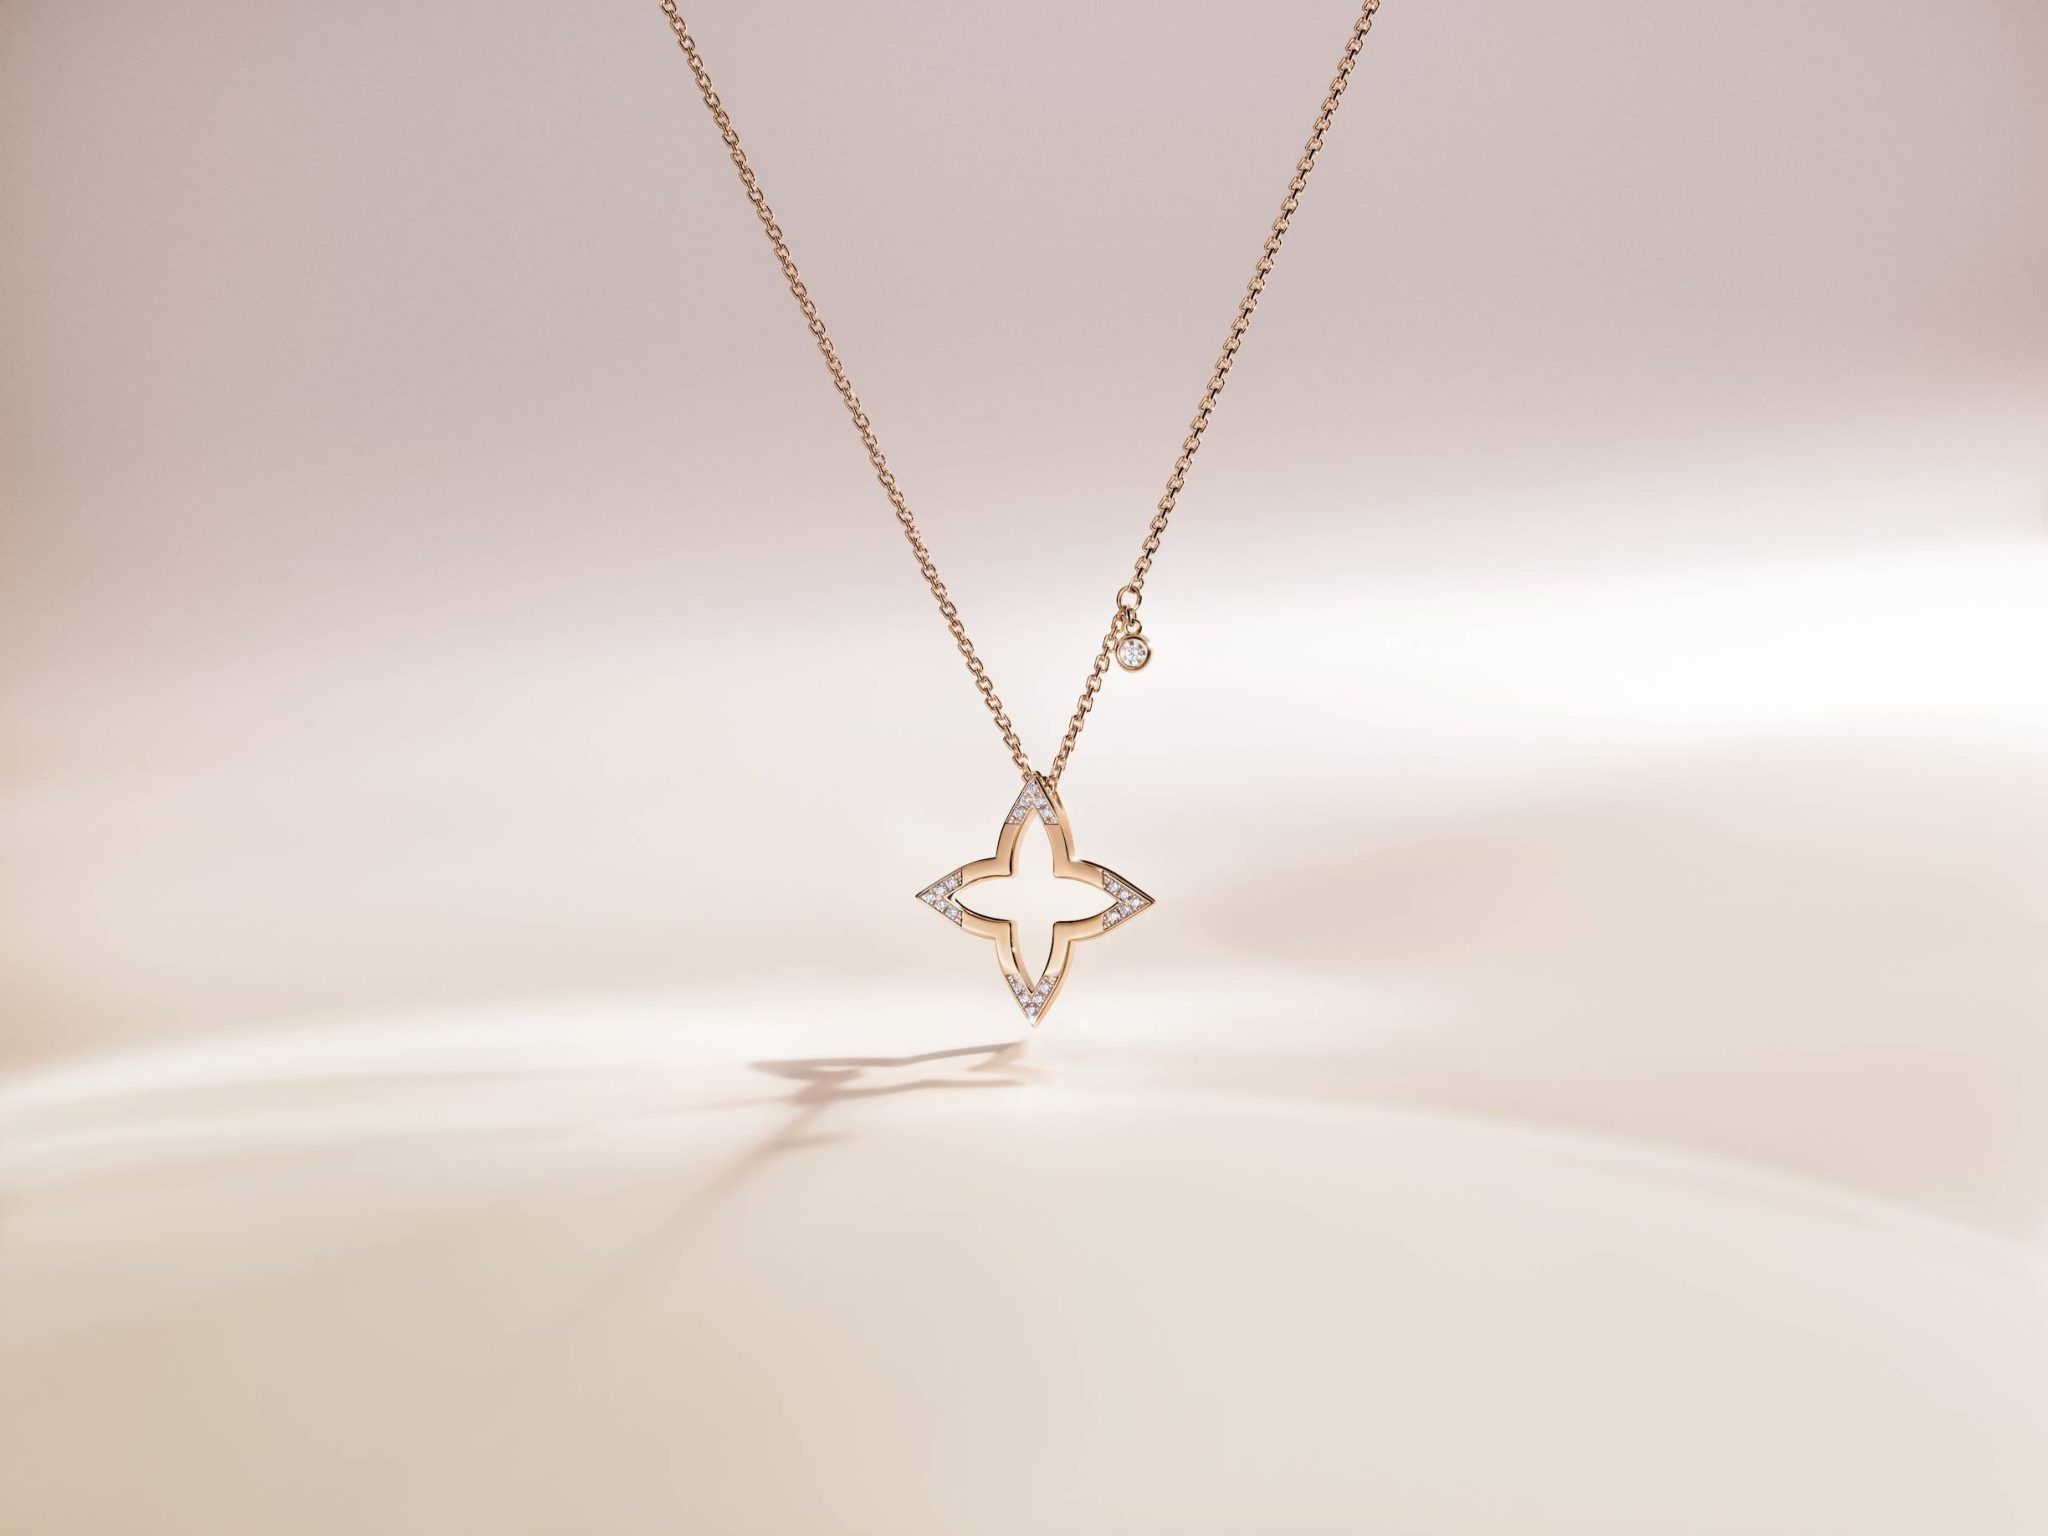 Louis Vuitton Star Blossom Necklace, White Gold, Diamonds, Gold, One Size